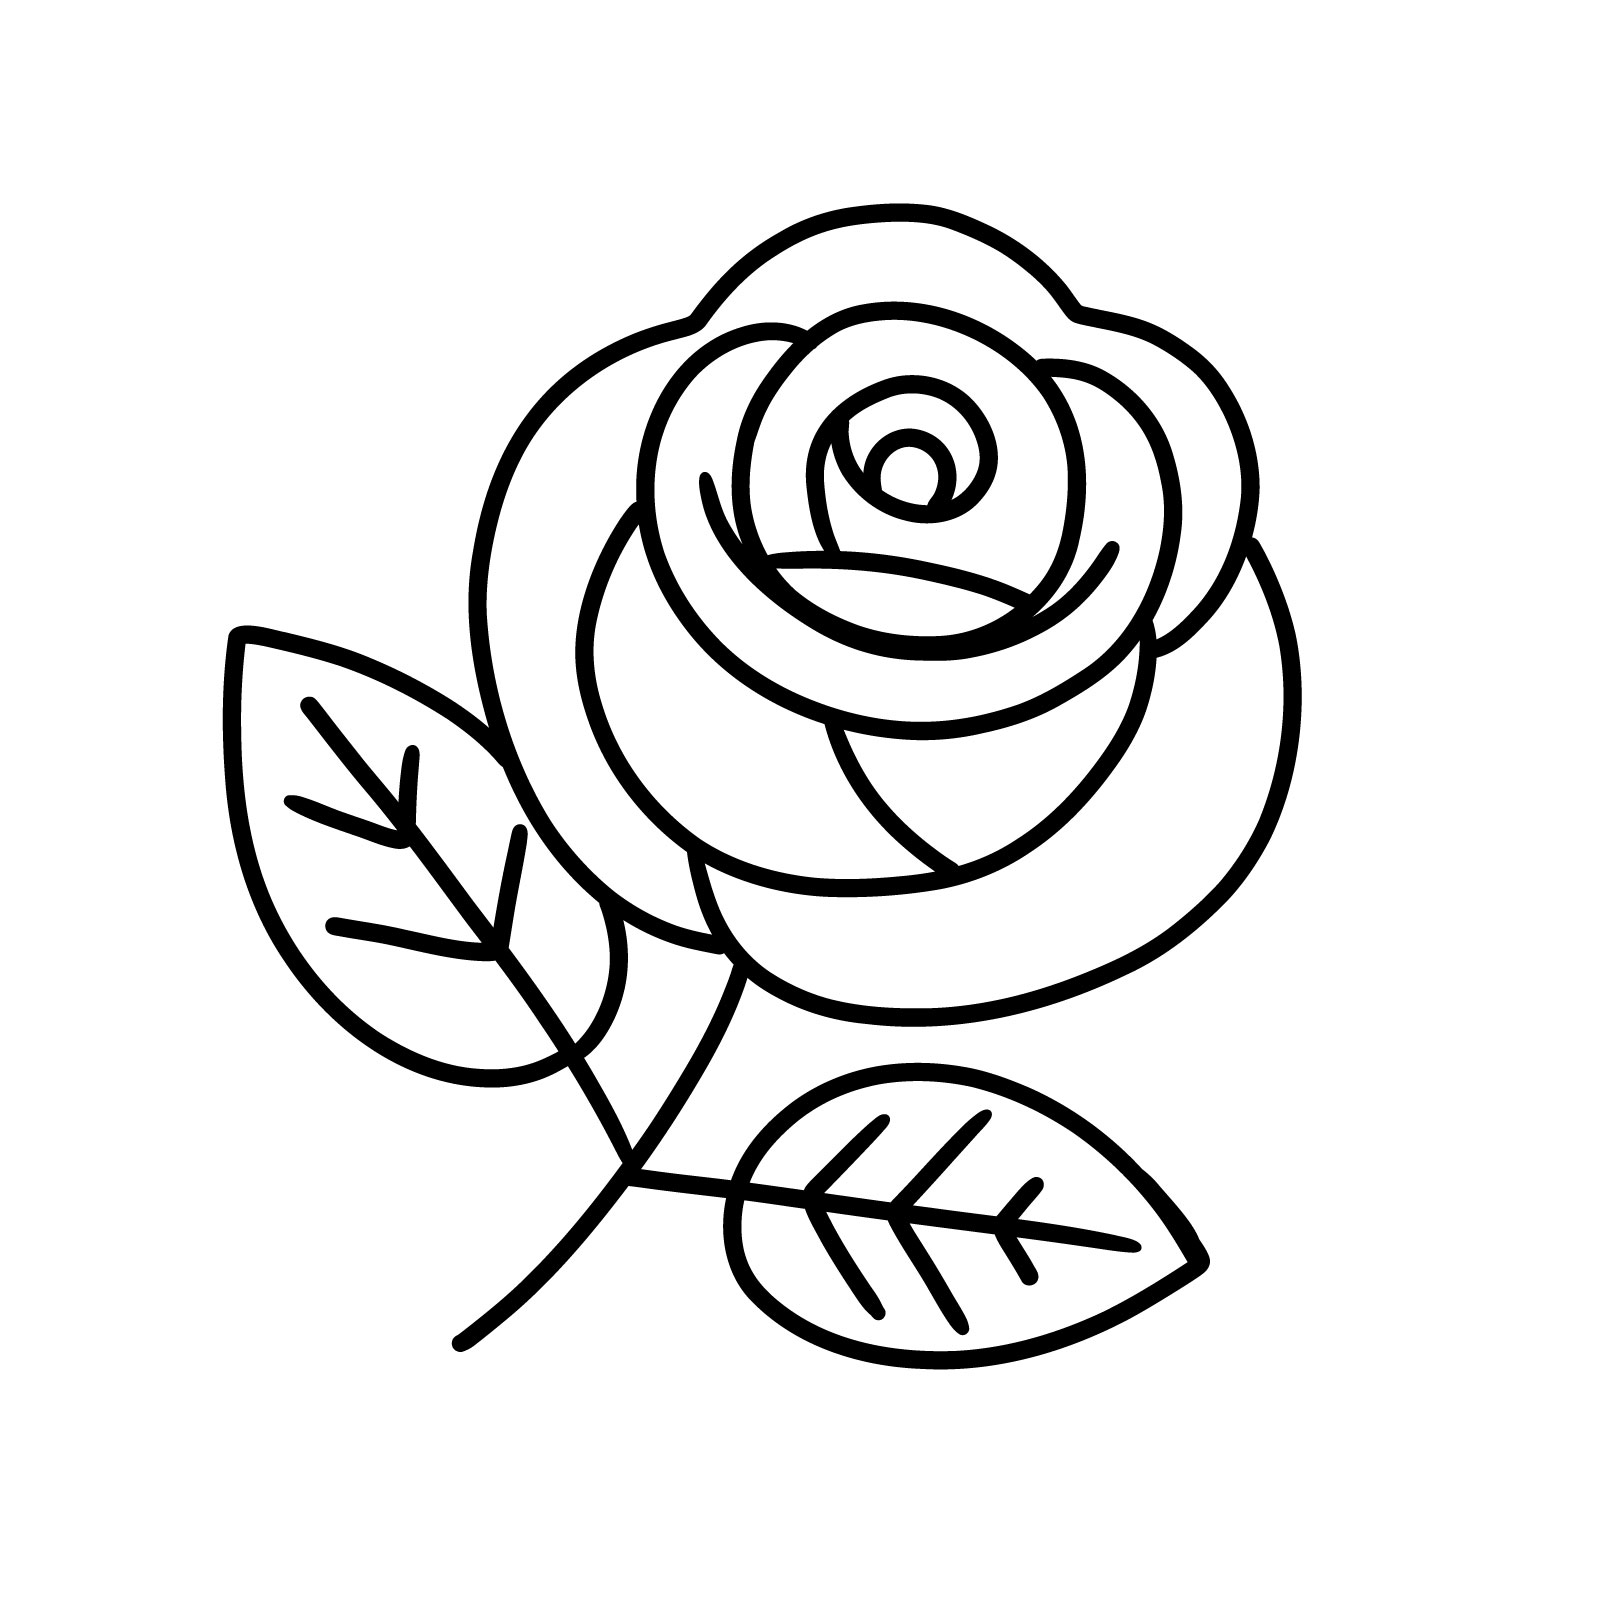 Easy Rose Line Art, Rose Flower Drawing for Kids, Natural Rose Coloring  Pages for Adults and Children Stock Vector - Illustration of cartoon,  doodle: 278686966